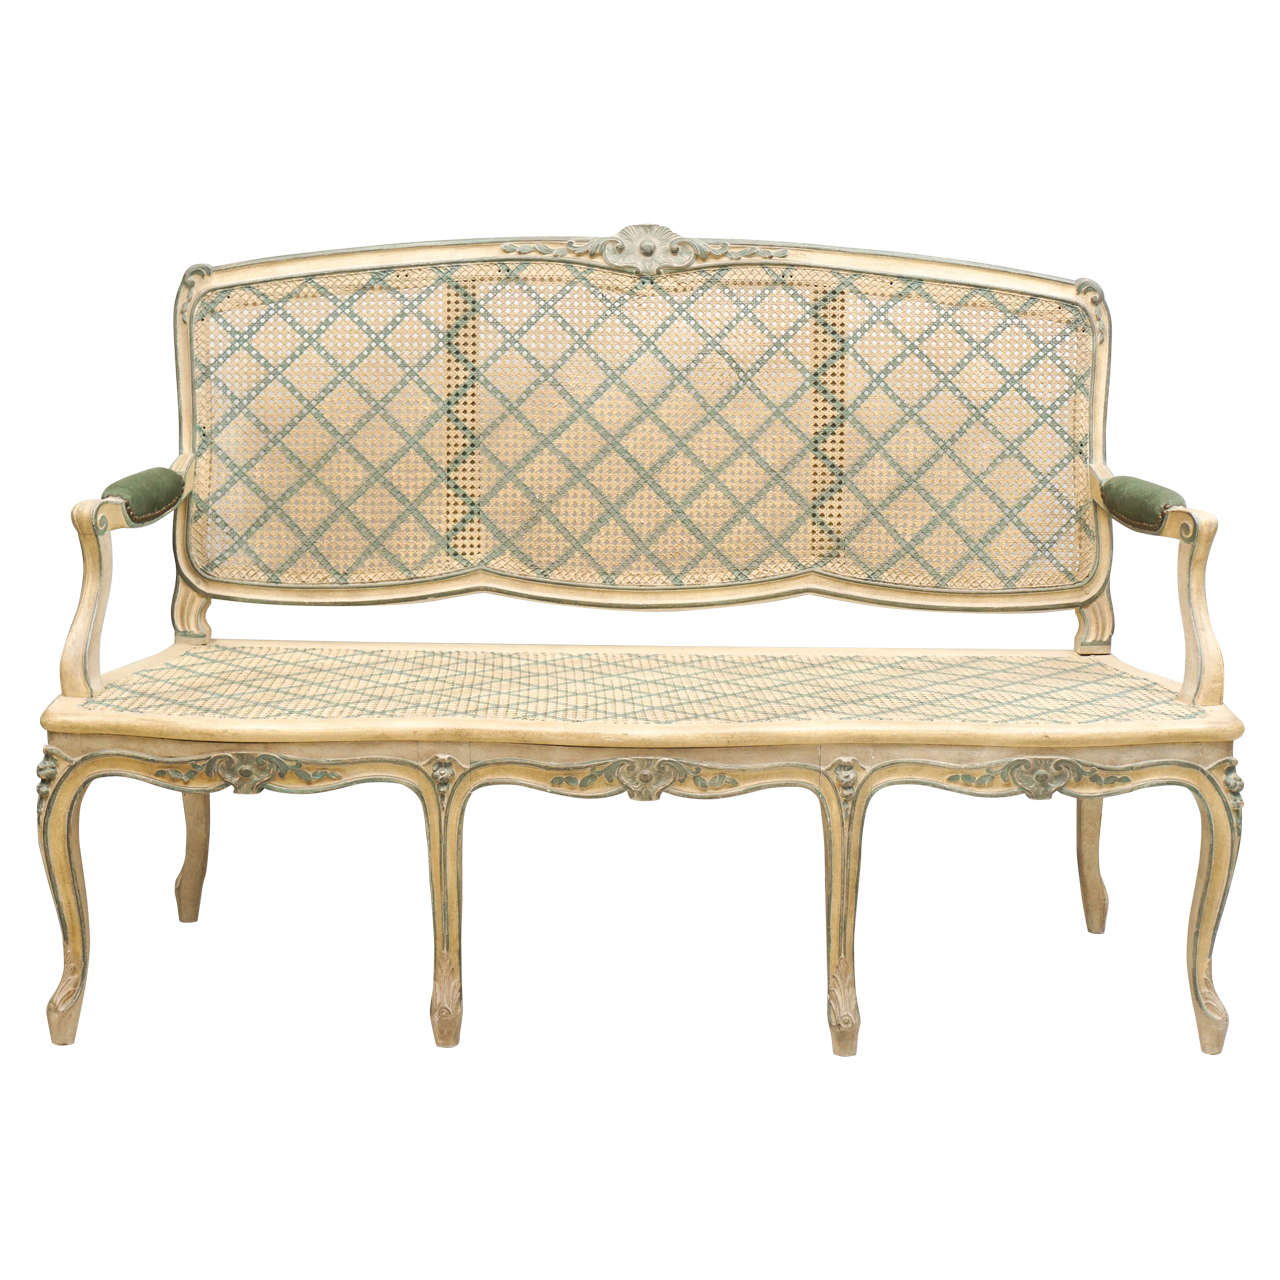 Early 20th Century Louis XV Style Finely Carved Wood and Caned Settee